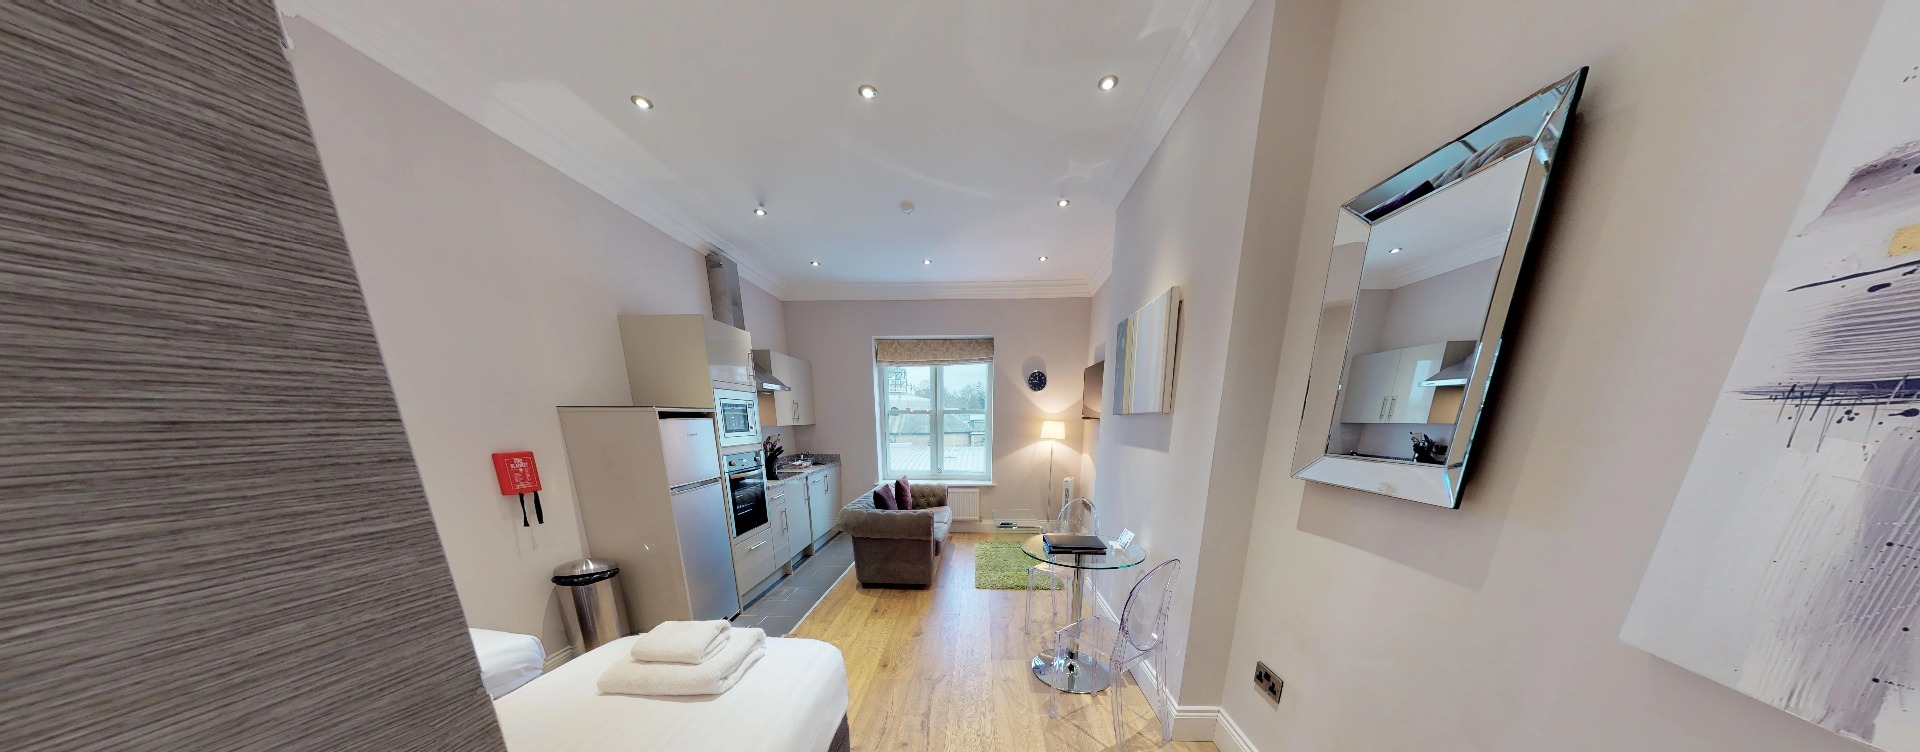 Harrogate Lifestyle offers stylish Studio one bathroom apartment for 1 or 2 people with double or twin bed set up facility. For Bookings Call now - 01423 568820